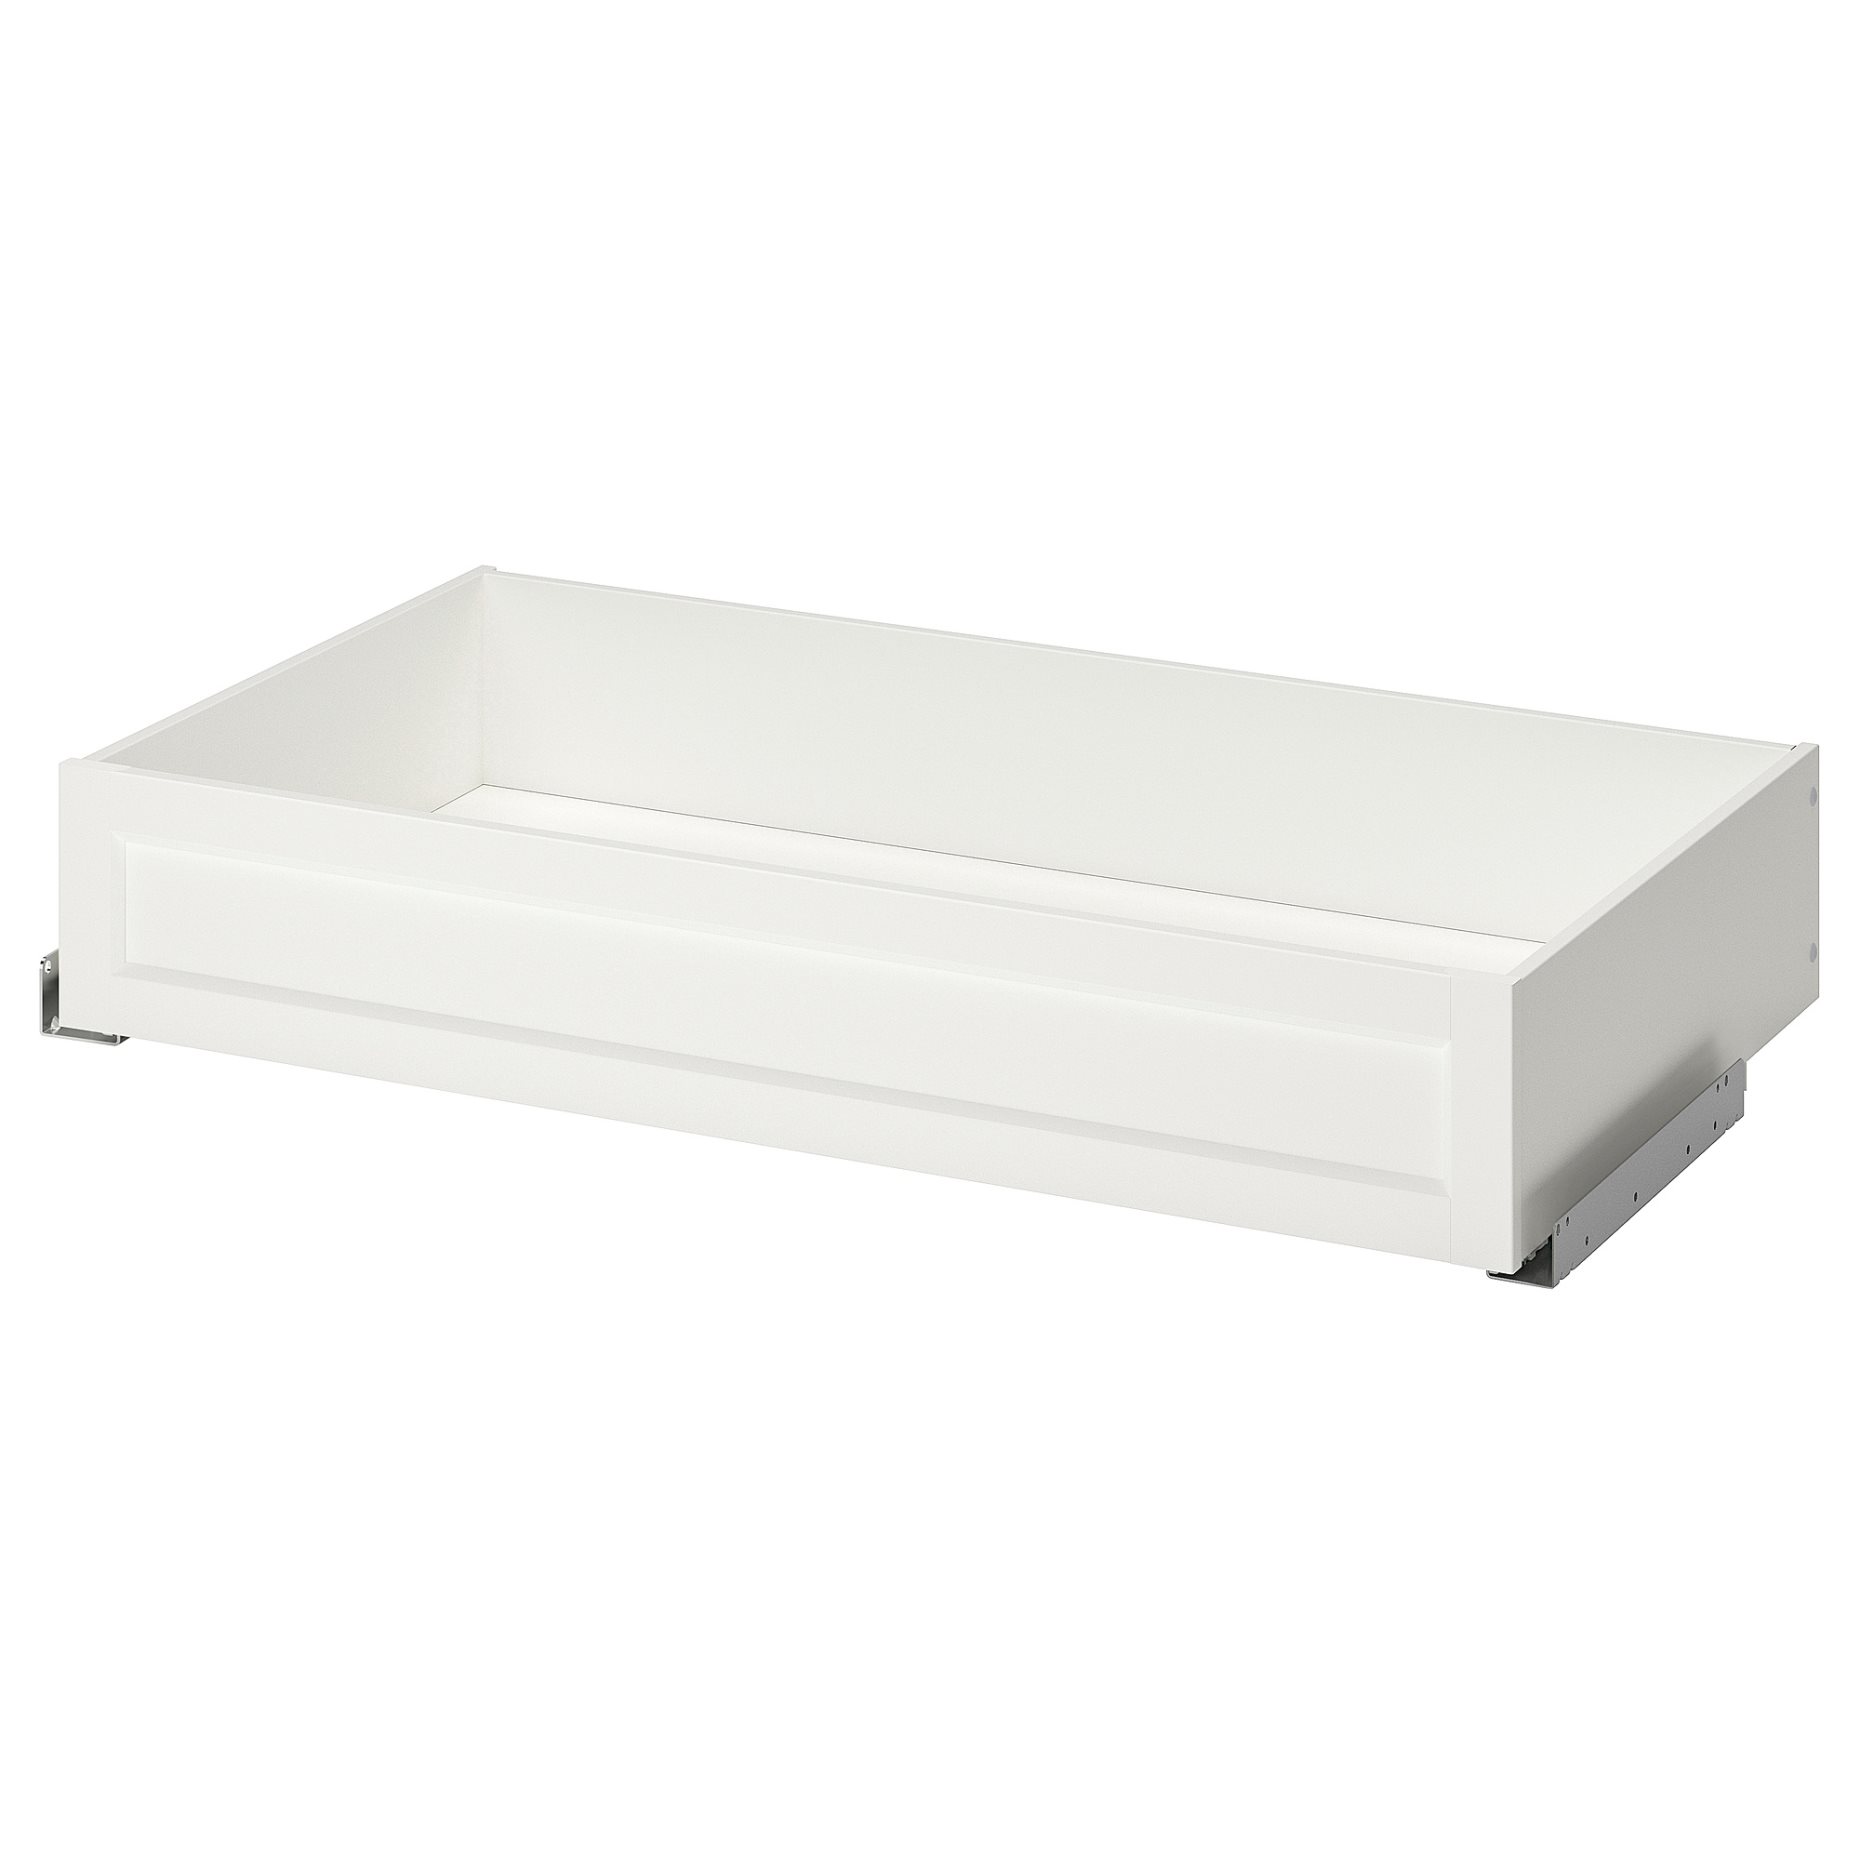 KOMPLEMENT, drawer with framed front, 504.465.98